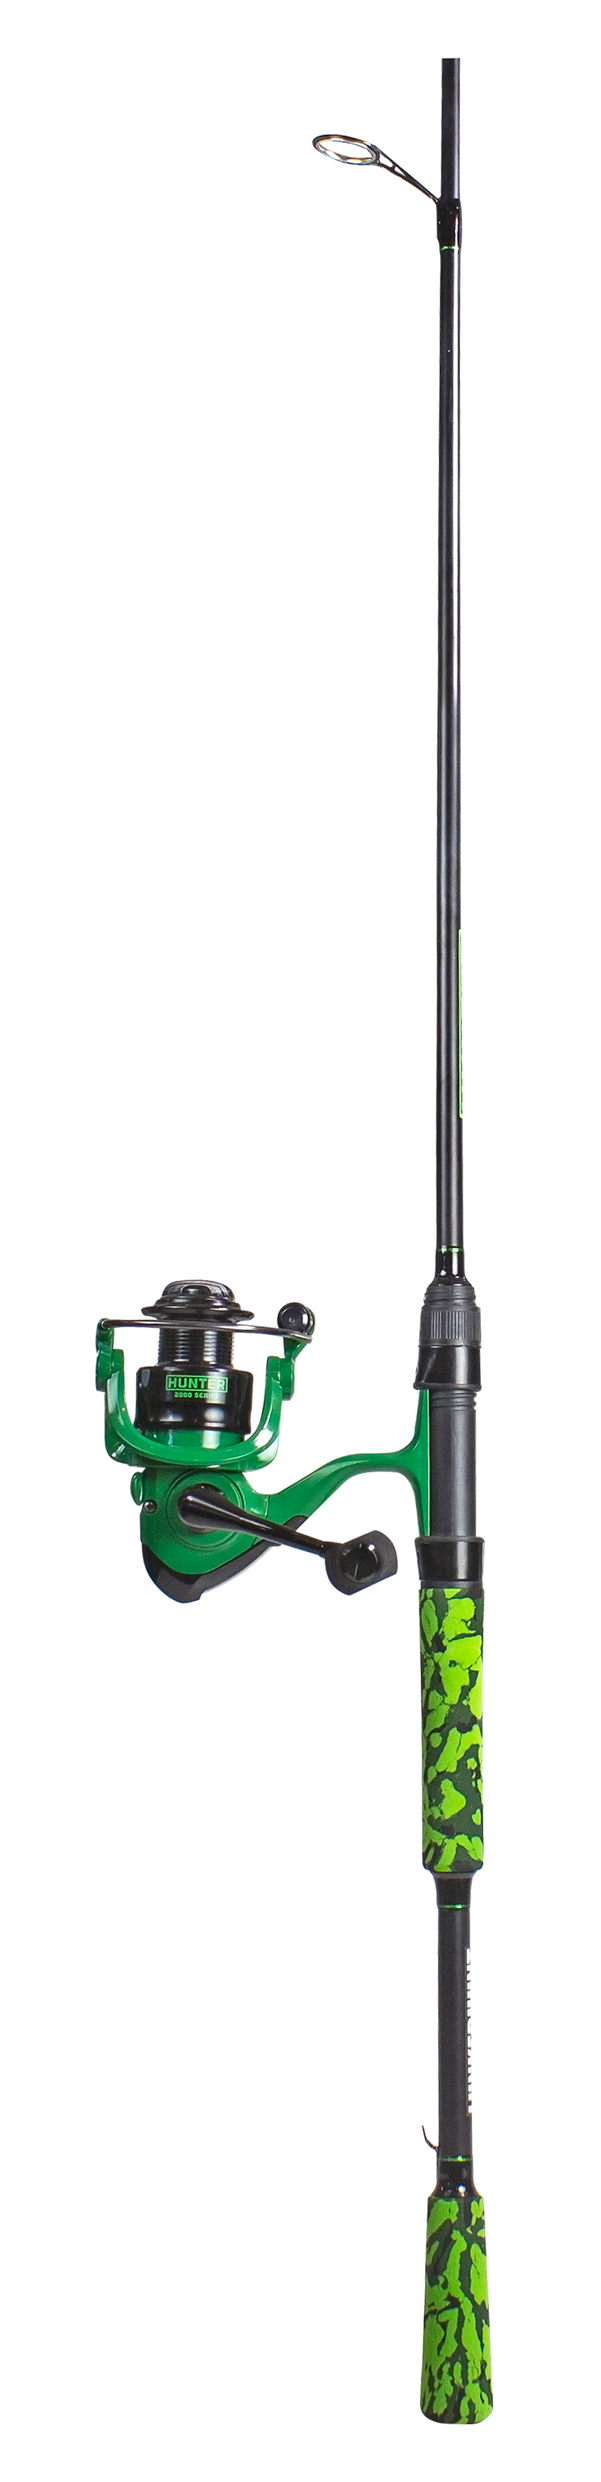 Lunkerhunt Hunter Spinning Rod Combo SHNTCOM01 , $8.00 Off with